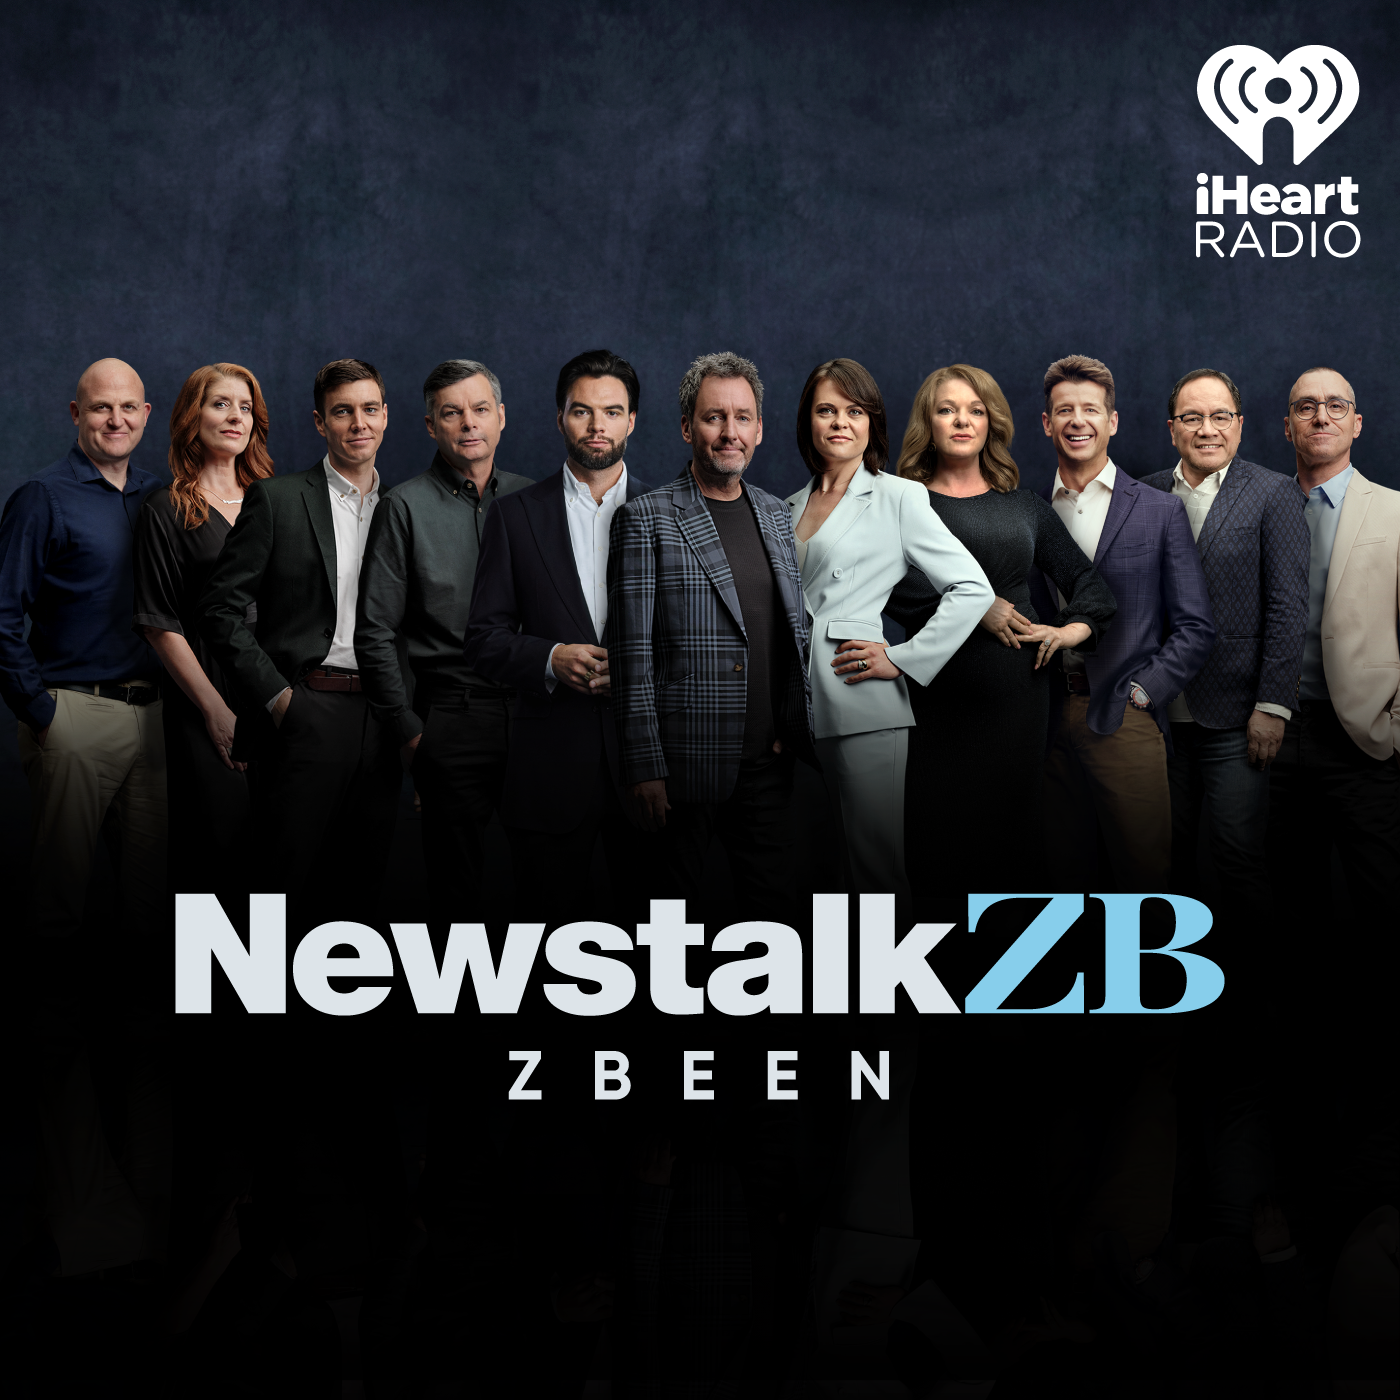 NEWSTALK ZBEEN: Division Exaggerated